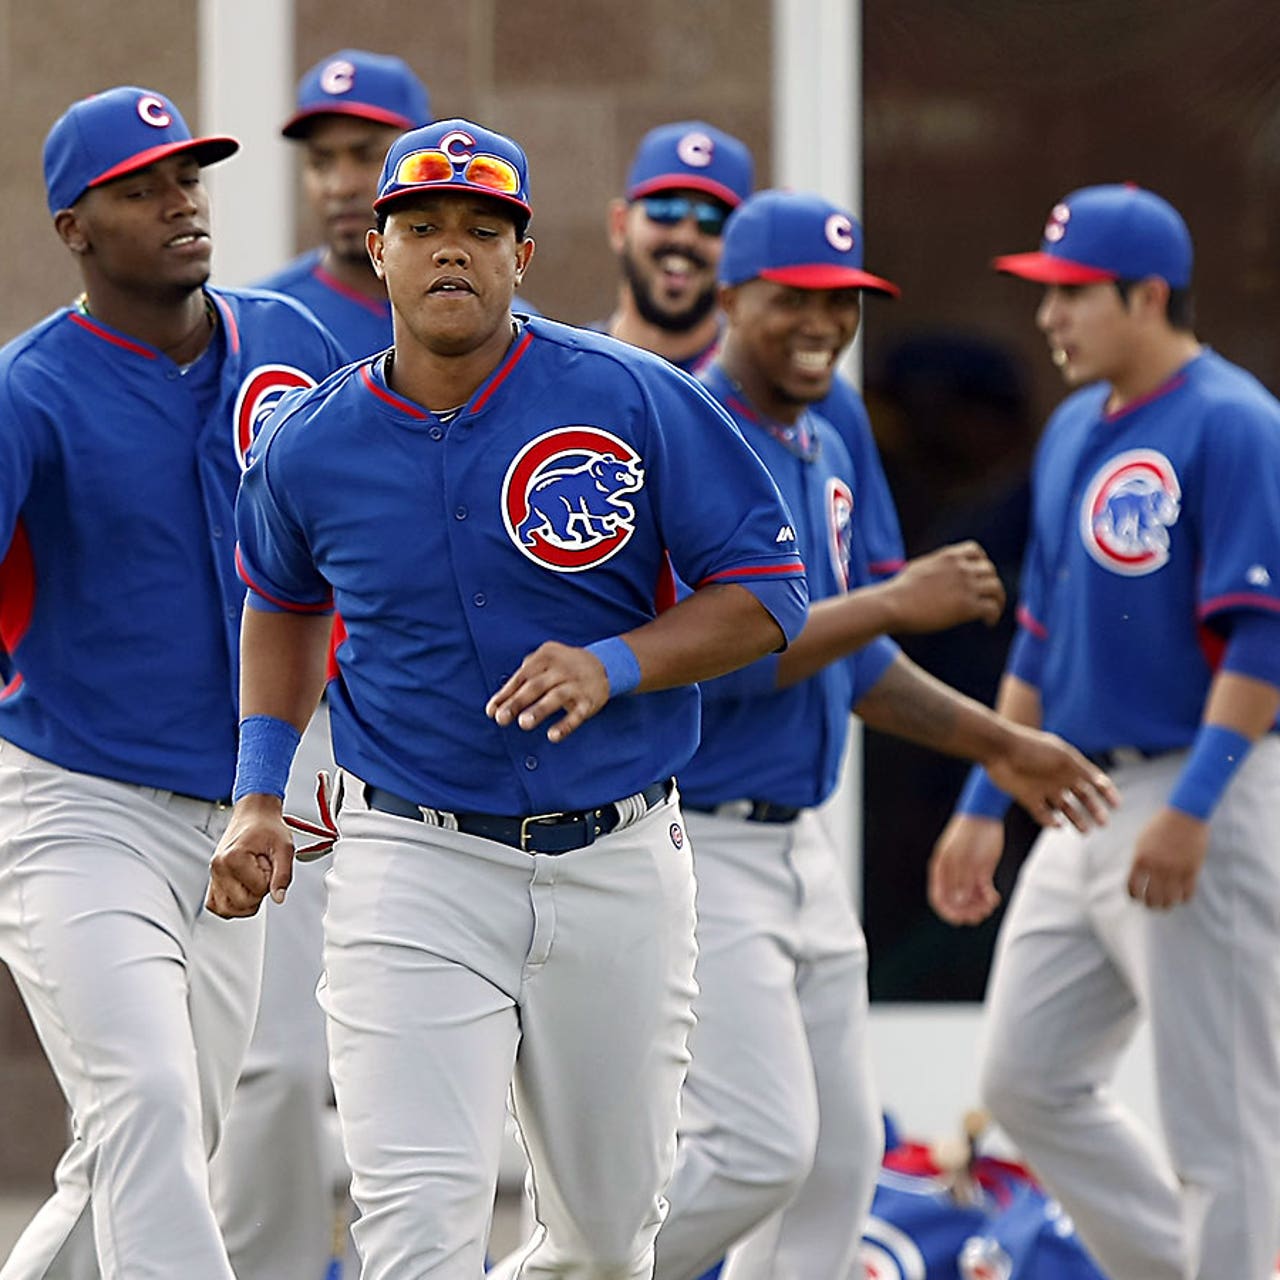 Soriano, Rizzo power Cubs past Rangers